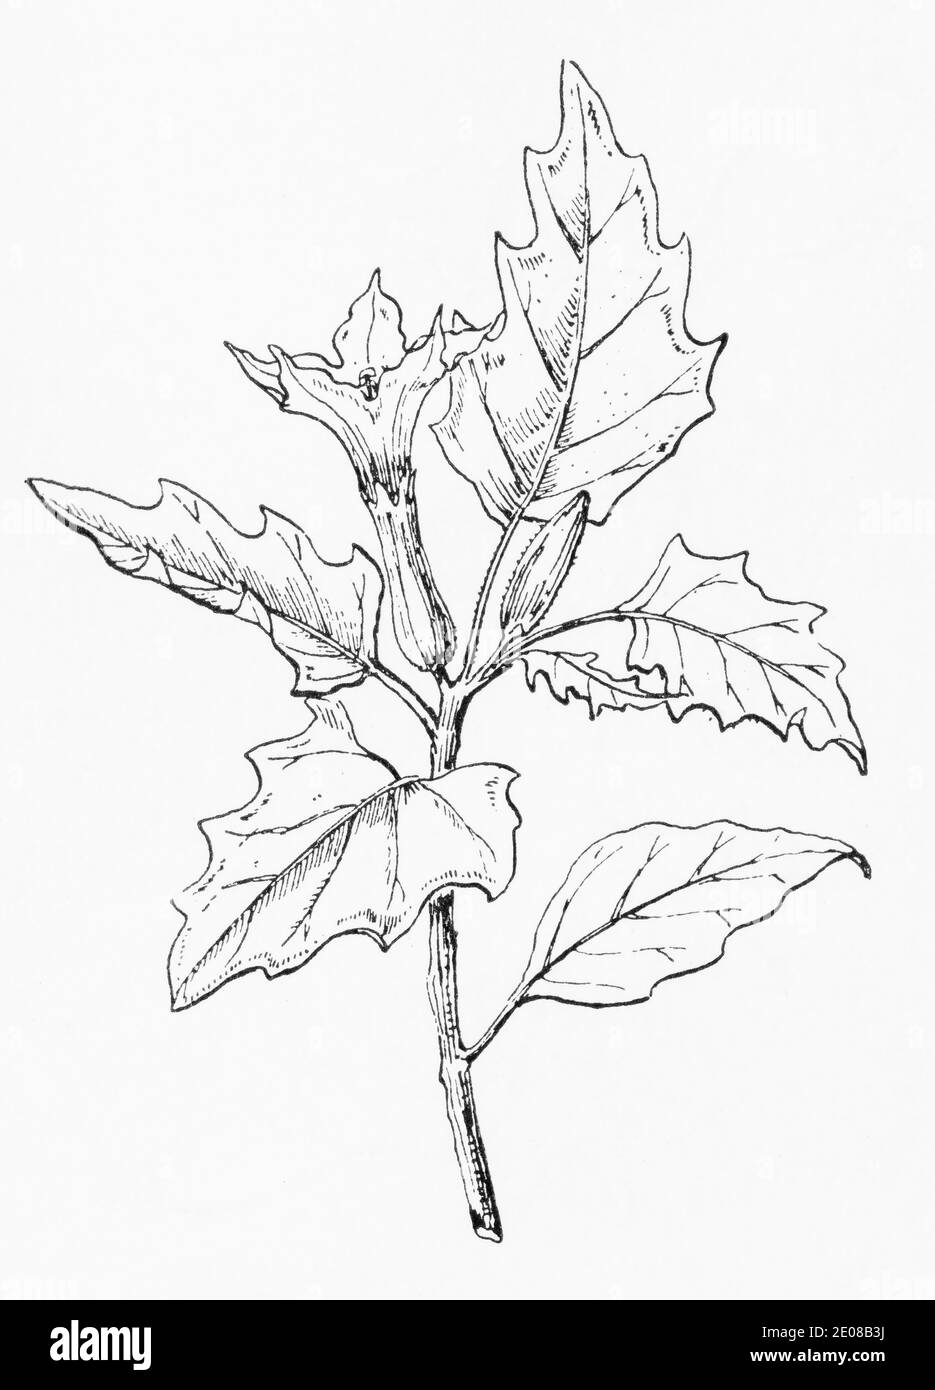 Old botanical illustration engraving of Thorn-apple / Datura stramonium.  Traditional medicinal herbal plant, but deadly poisonous. See Notes Stock Photo